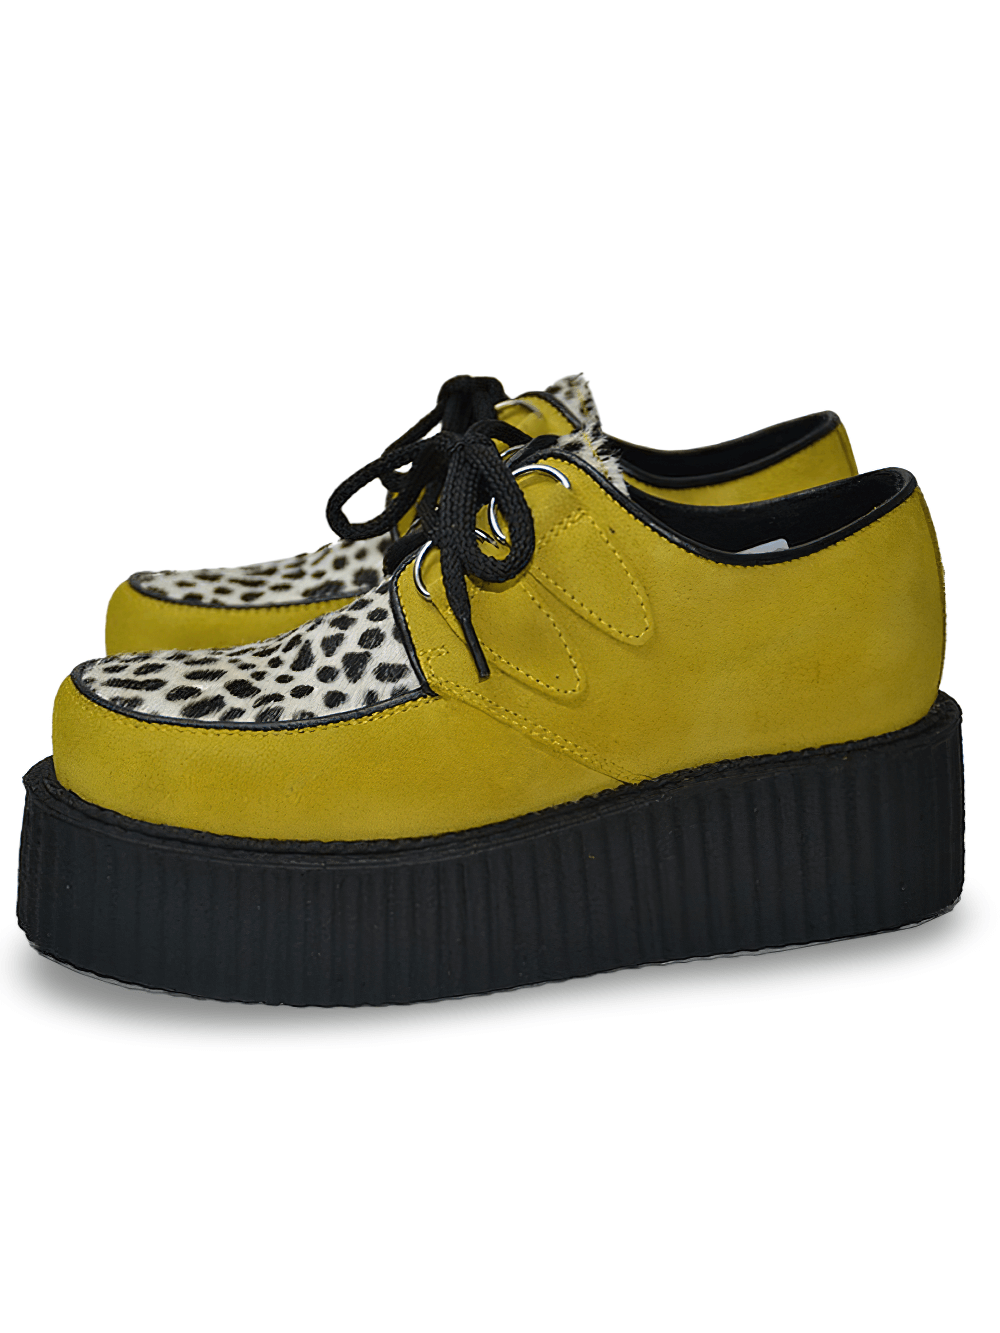 Unisex Suede and Fur Creepers With Double Sole